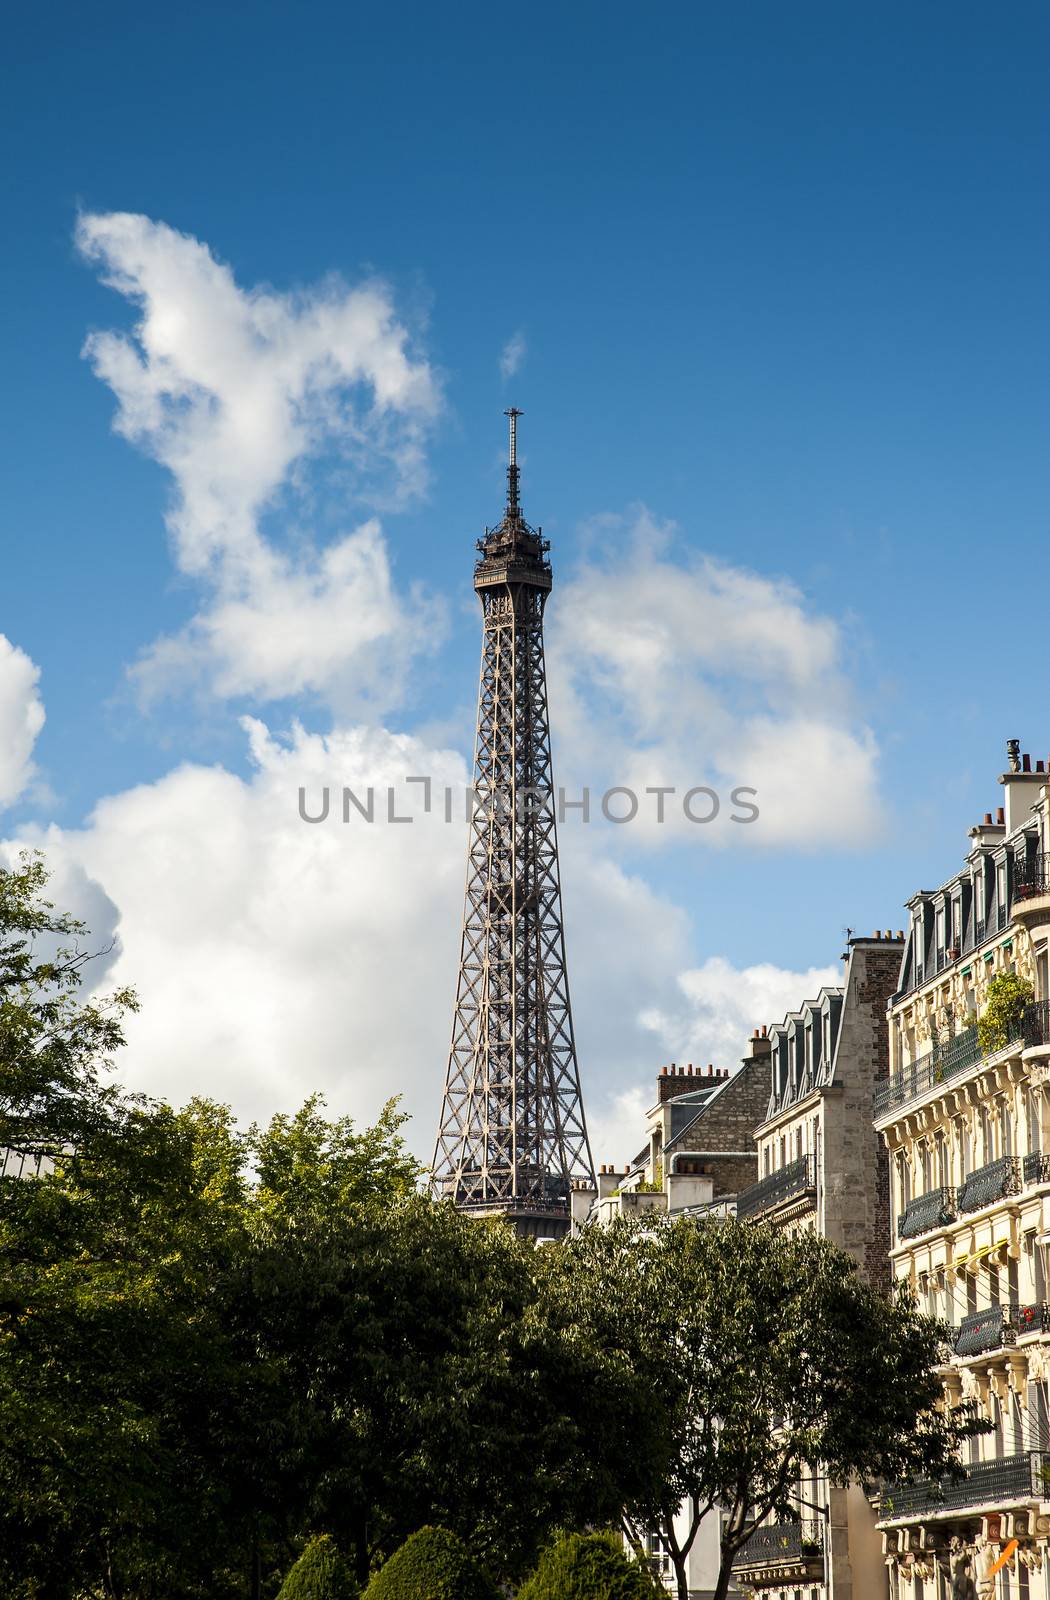 Image of the top of the Tour Eiffel in Paris